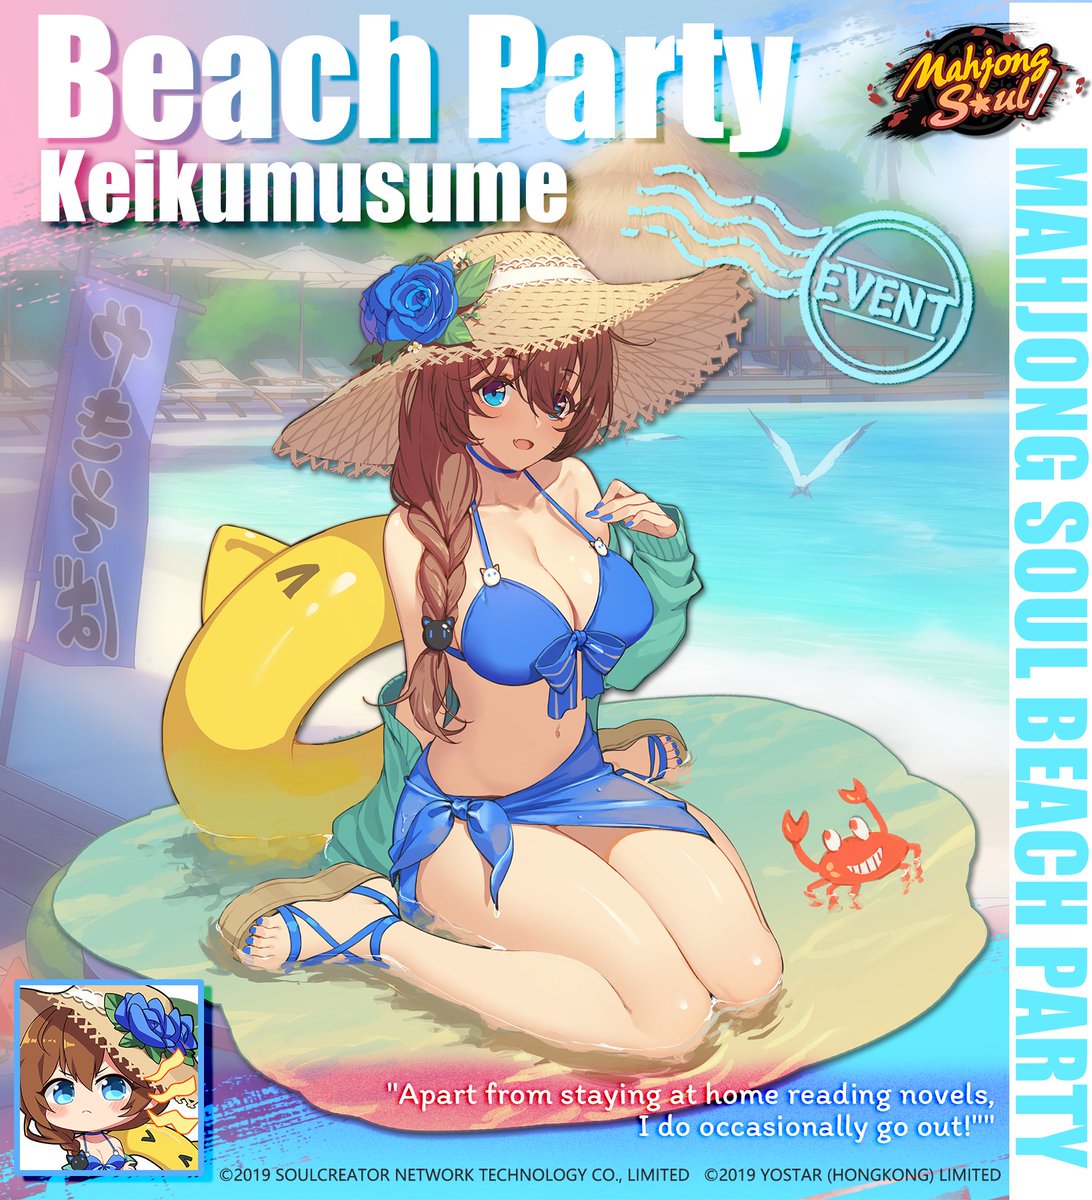 Mahjong Soul Official on X: ⛱Beach Party - Keikumusume🌊 Here comes a  Beach Party outfit for Keikumusume. Let's enjoy the fun of summer together,  Jyanshi Sama! Participate in the event, claim event